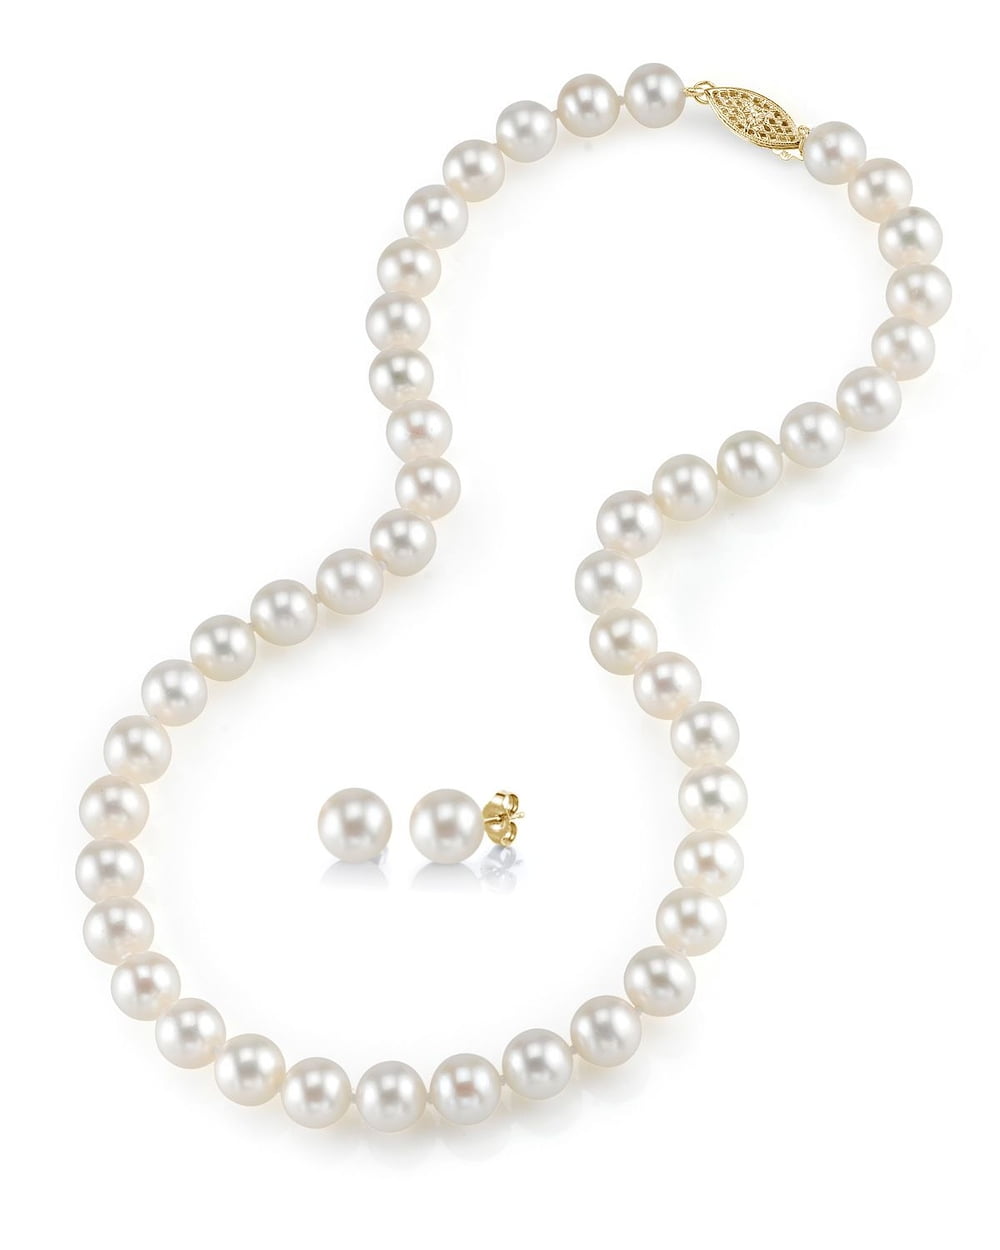 Pearl Necklace and Stud Earrings Set 14k Yellow Gold 8-9mm White Freshwater 